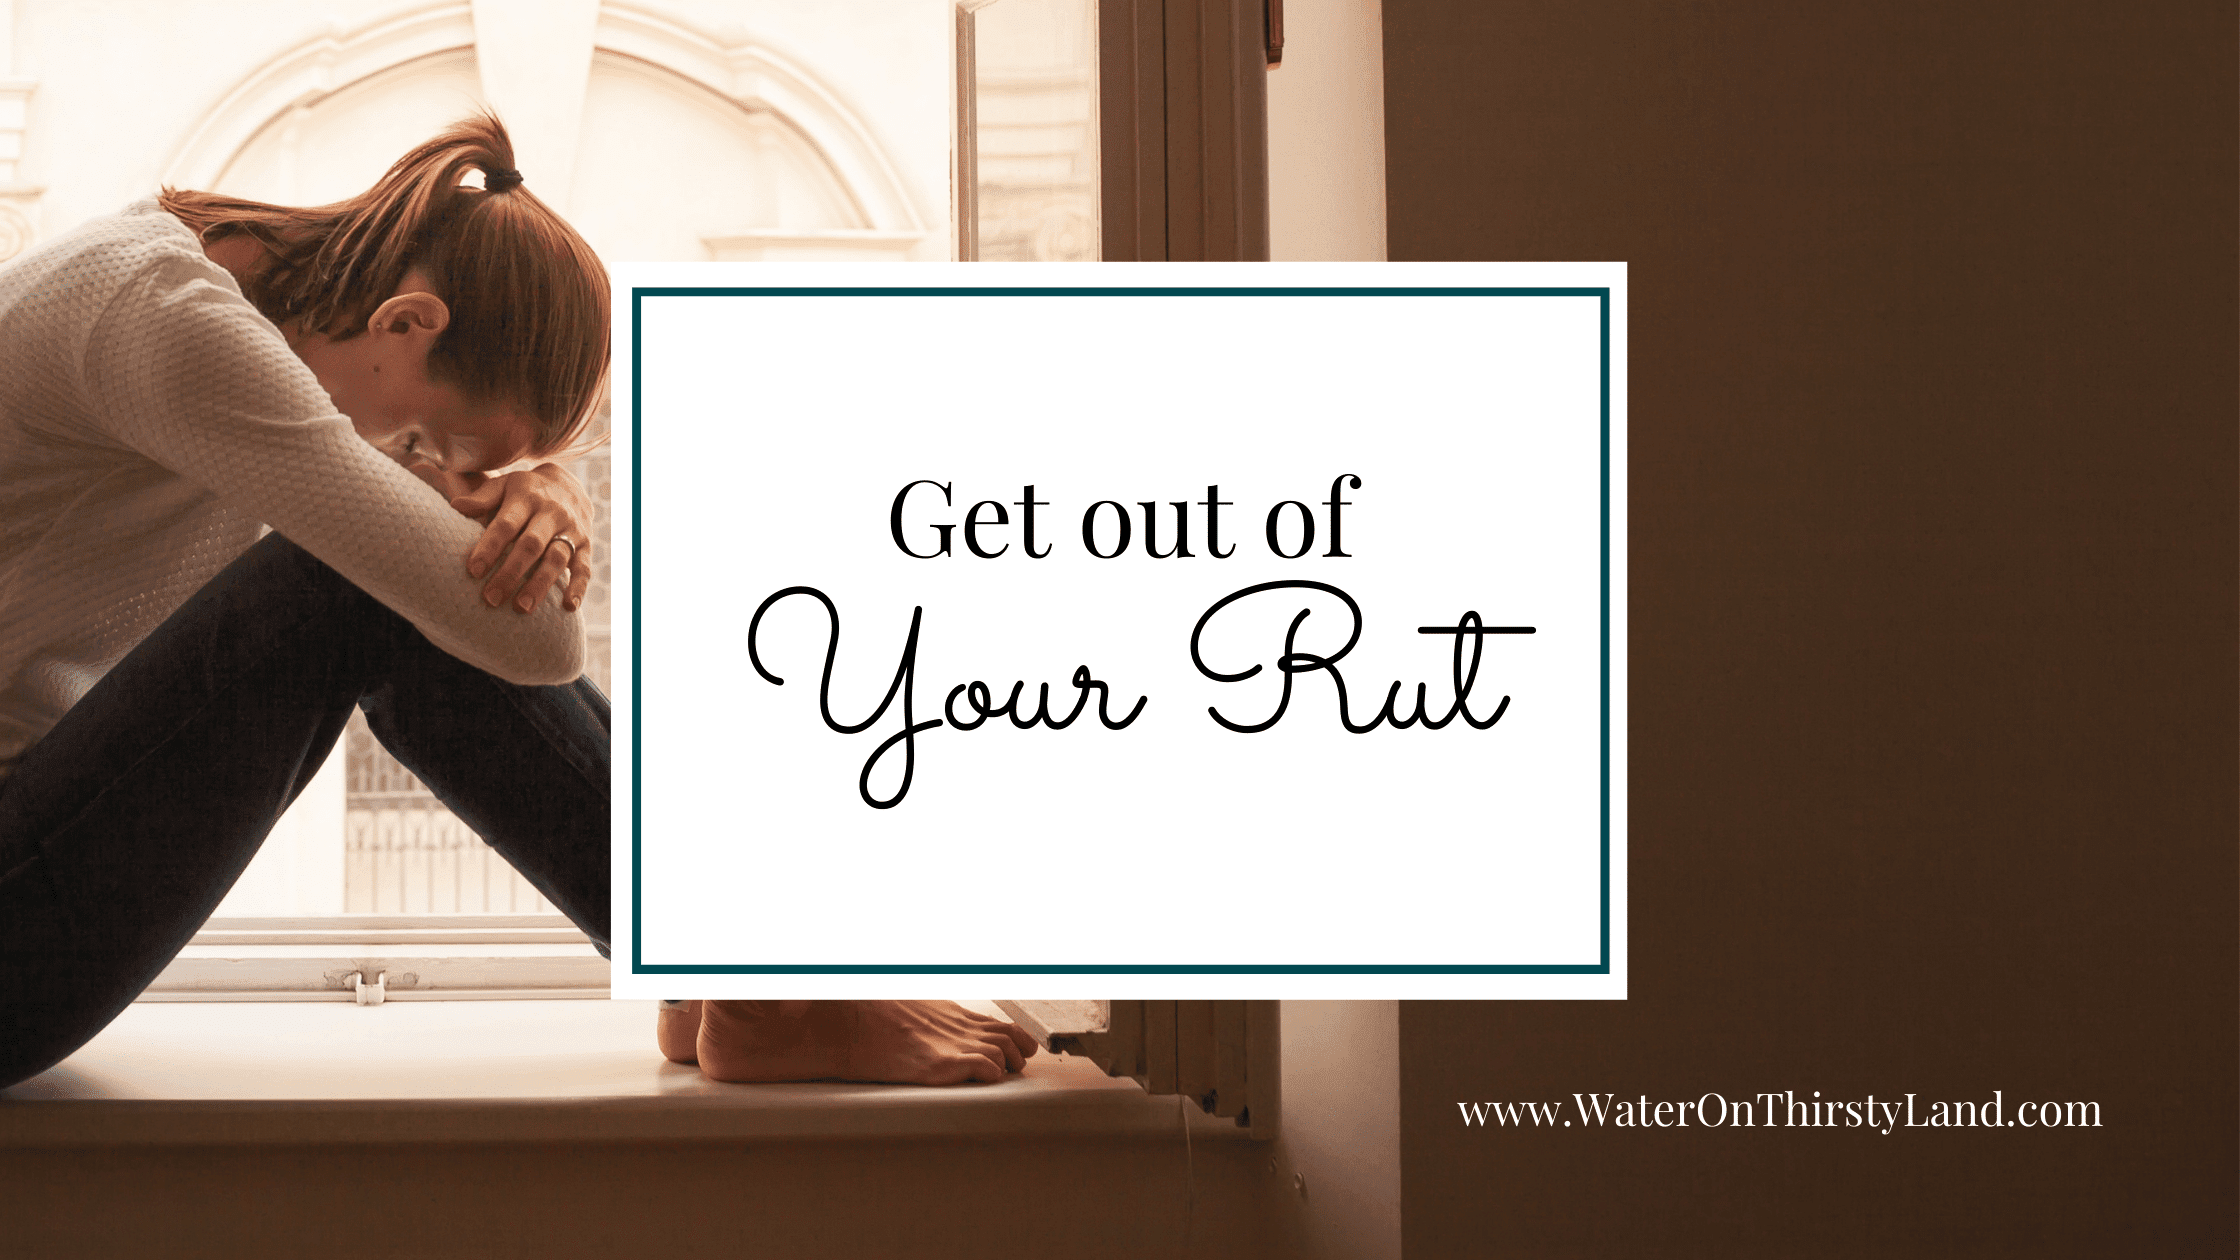 Get Out of Your Rut